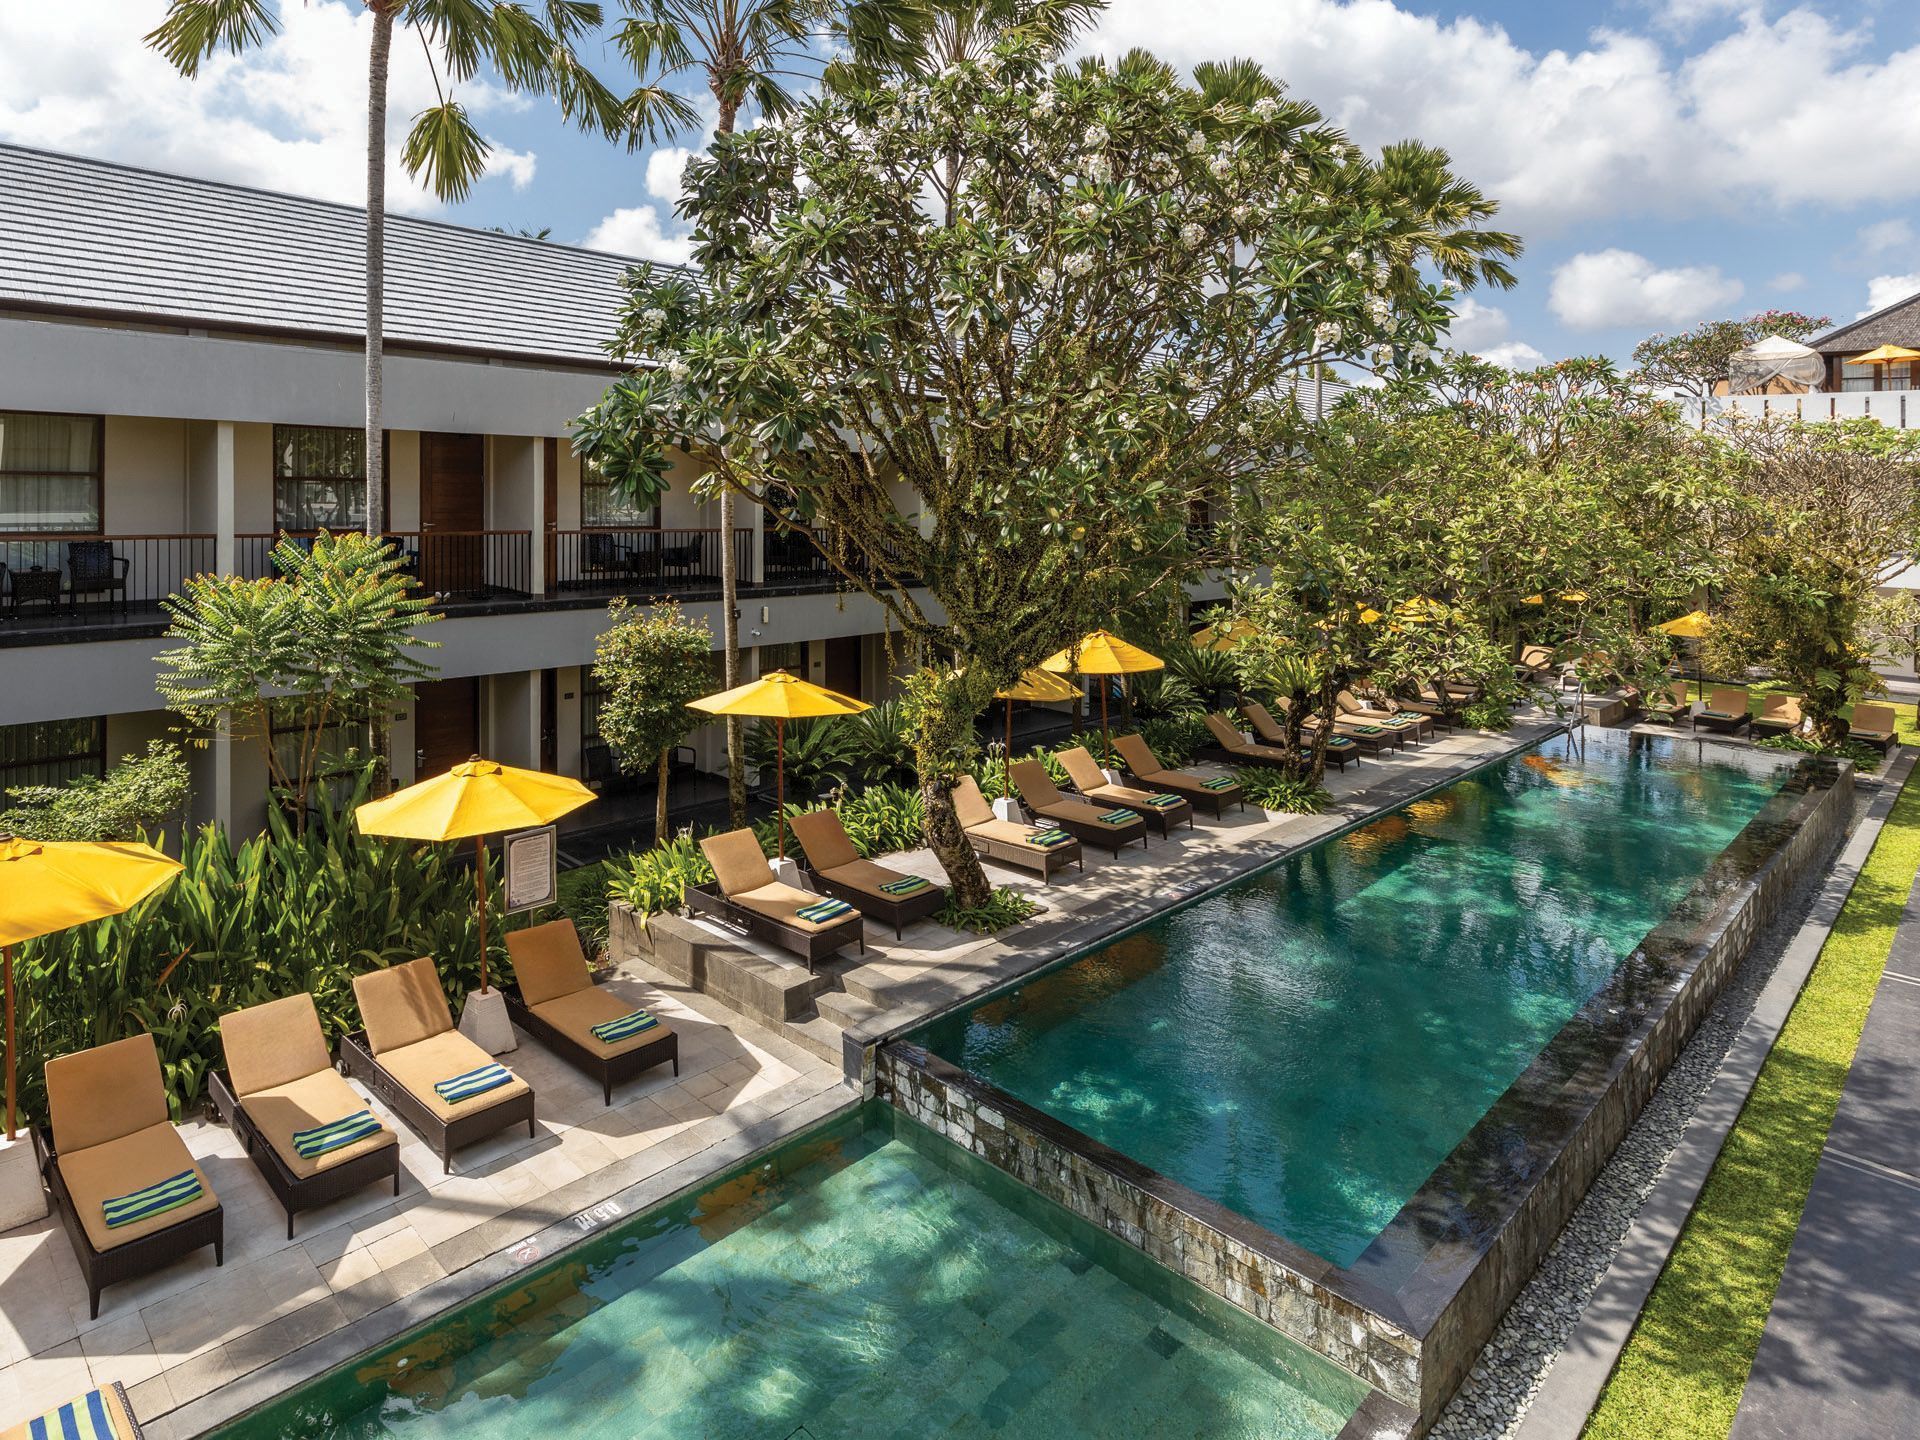 Combine the vibrant side of Seminyak and peaceful lifestyle of Bali